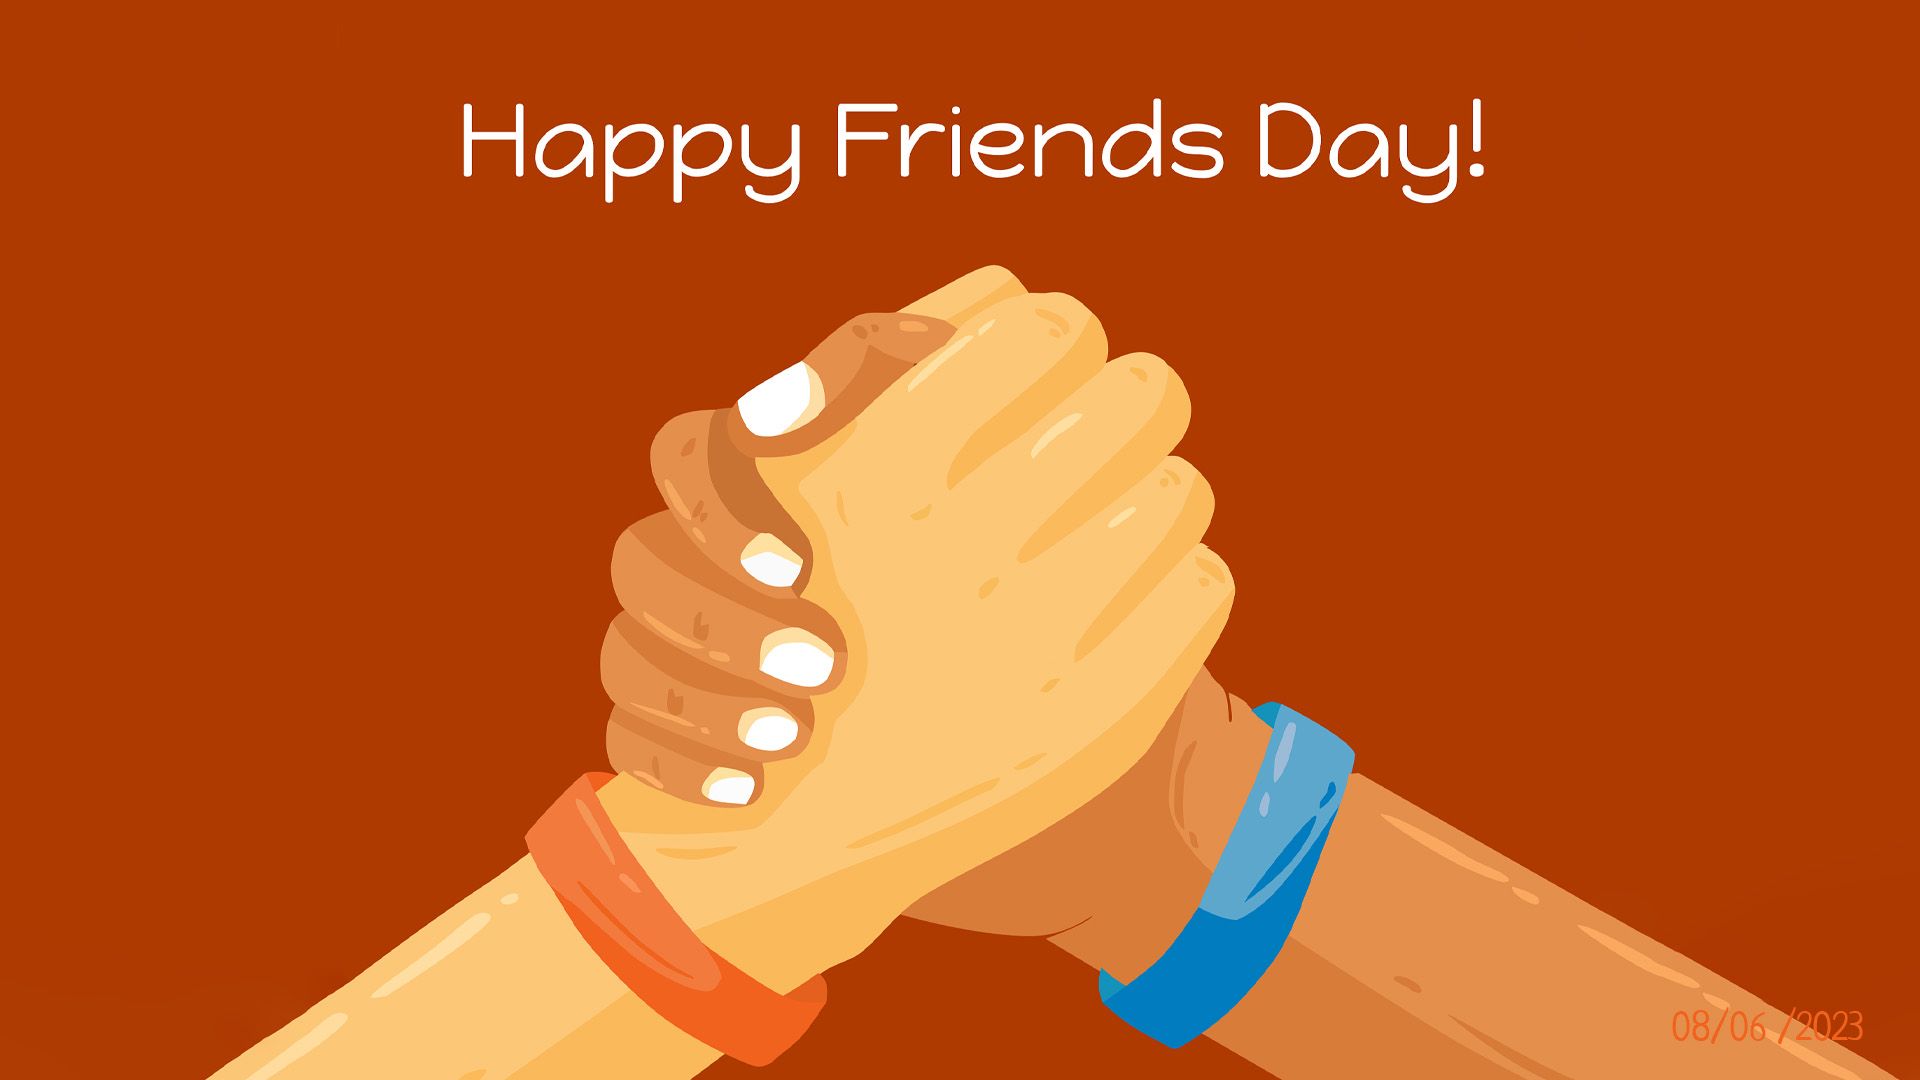 The background is a rusty orange color. Across the top in a handwritten white font reads, Happy Friends Day! The middle of the graphic there are 2 illustrated hands holding one another. One is wearing a blue bracelet and the other is wearing a red bracelet.